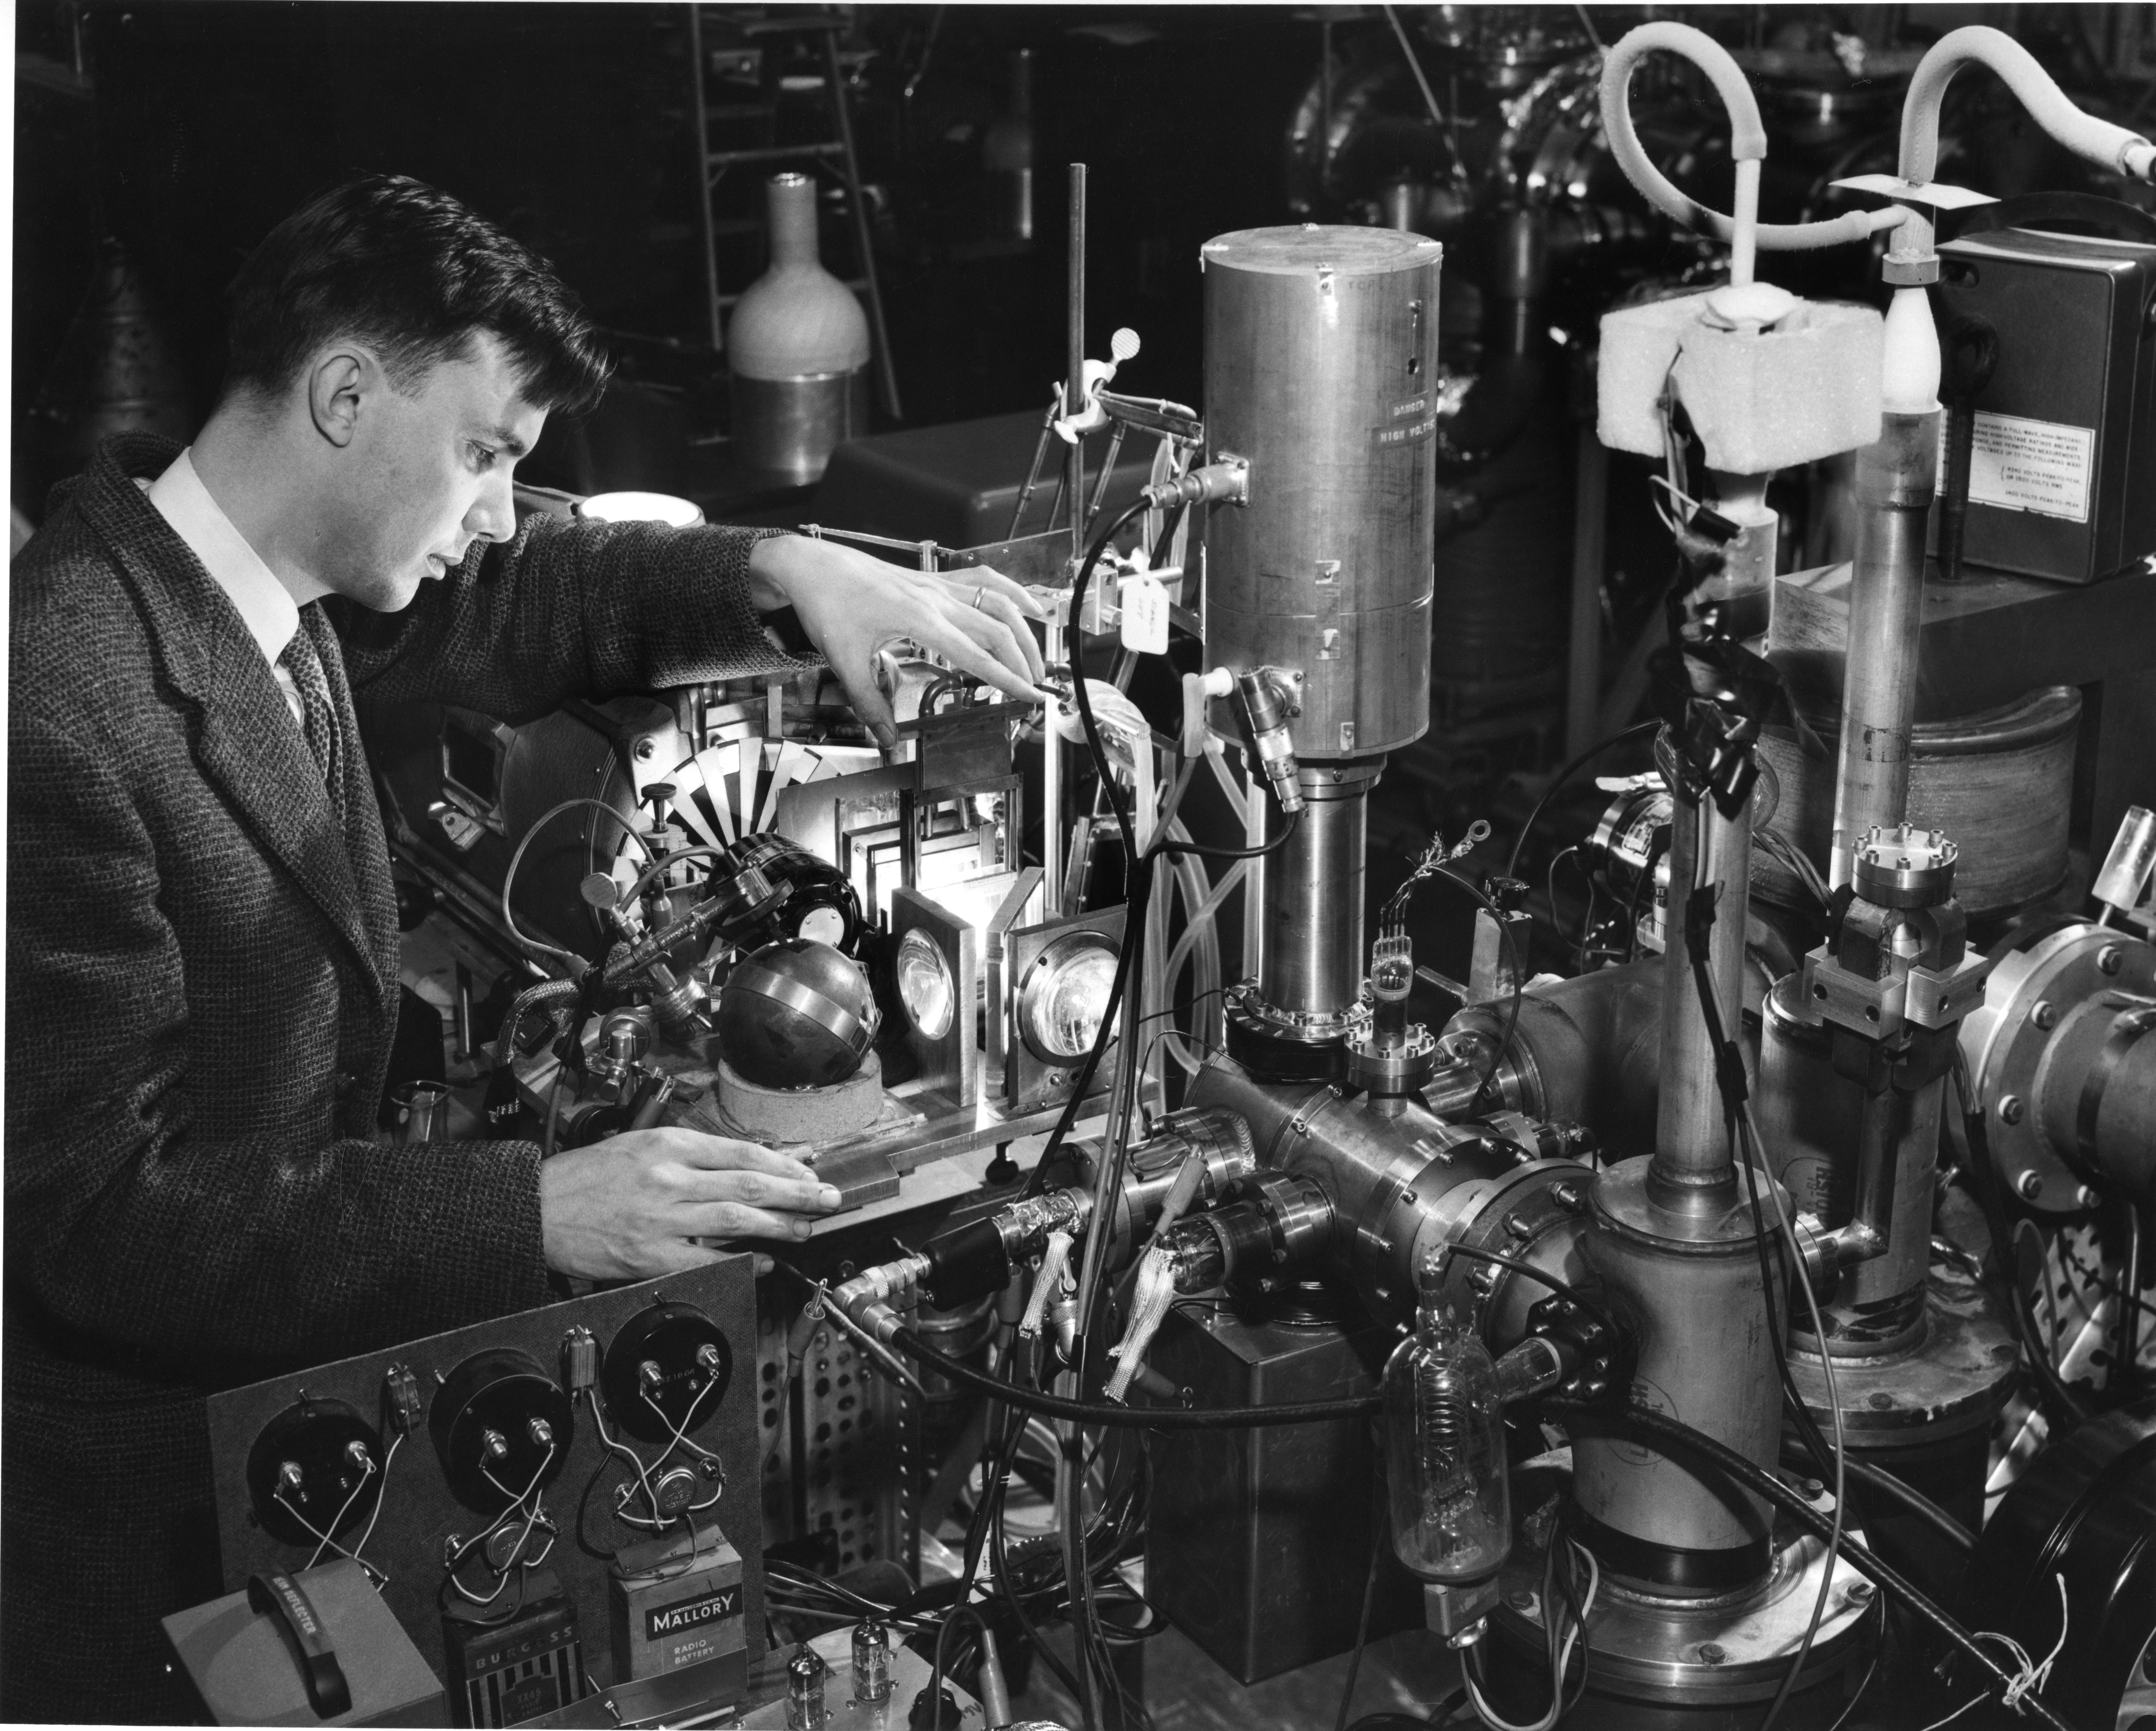 A black and white image of a man in a gray suit standing next to a complex machine with a profusion of tubes, wires and lights.